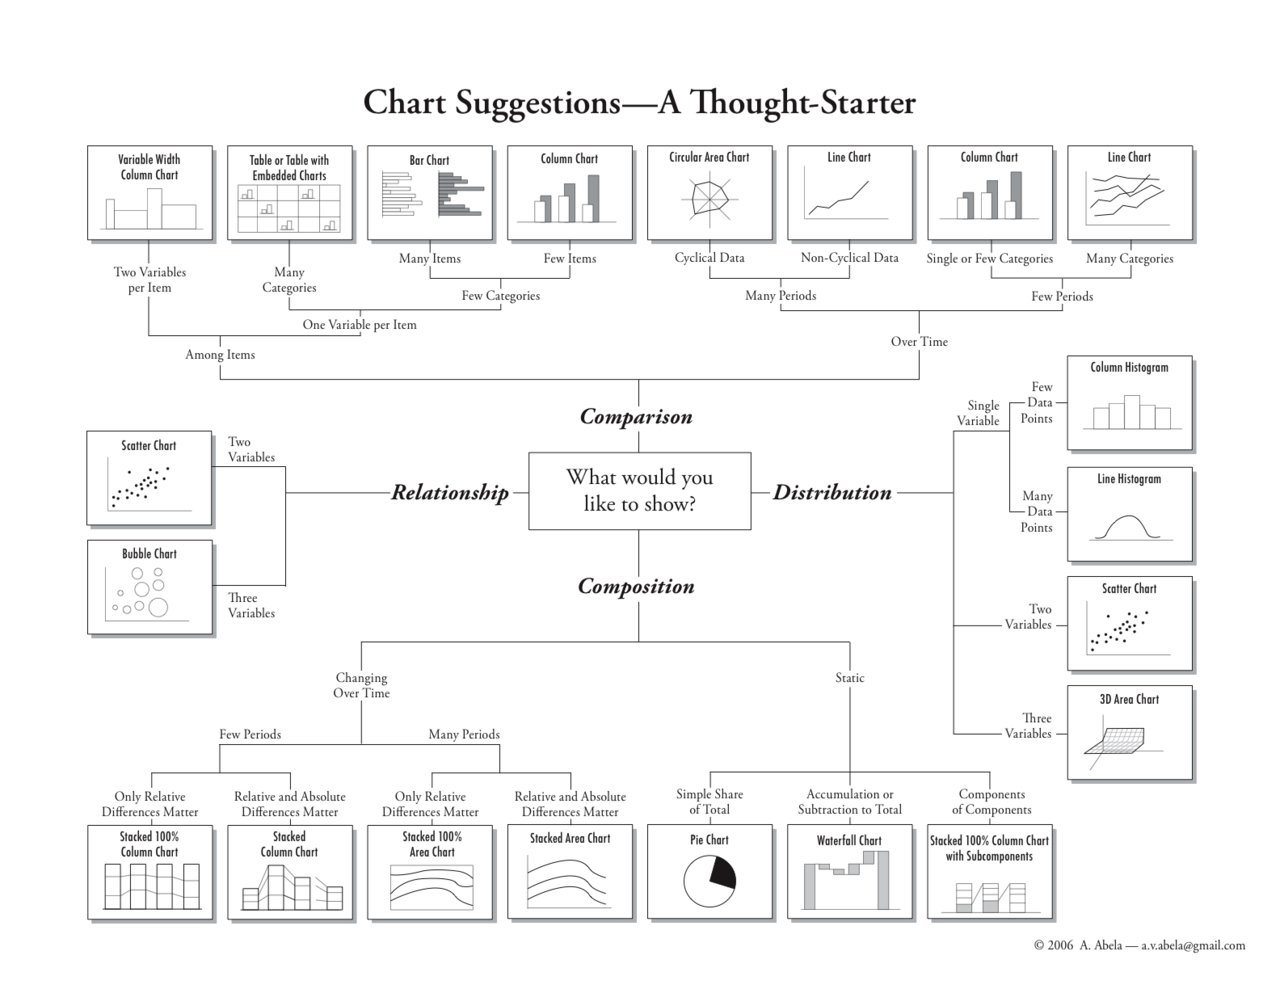 Andrew Abela's Chart Suggestions--A Thought Starter